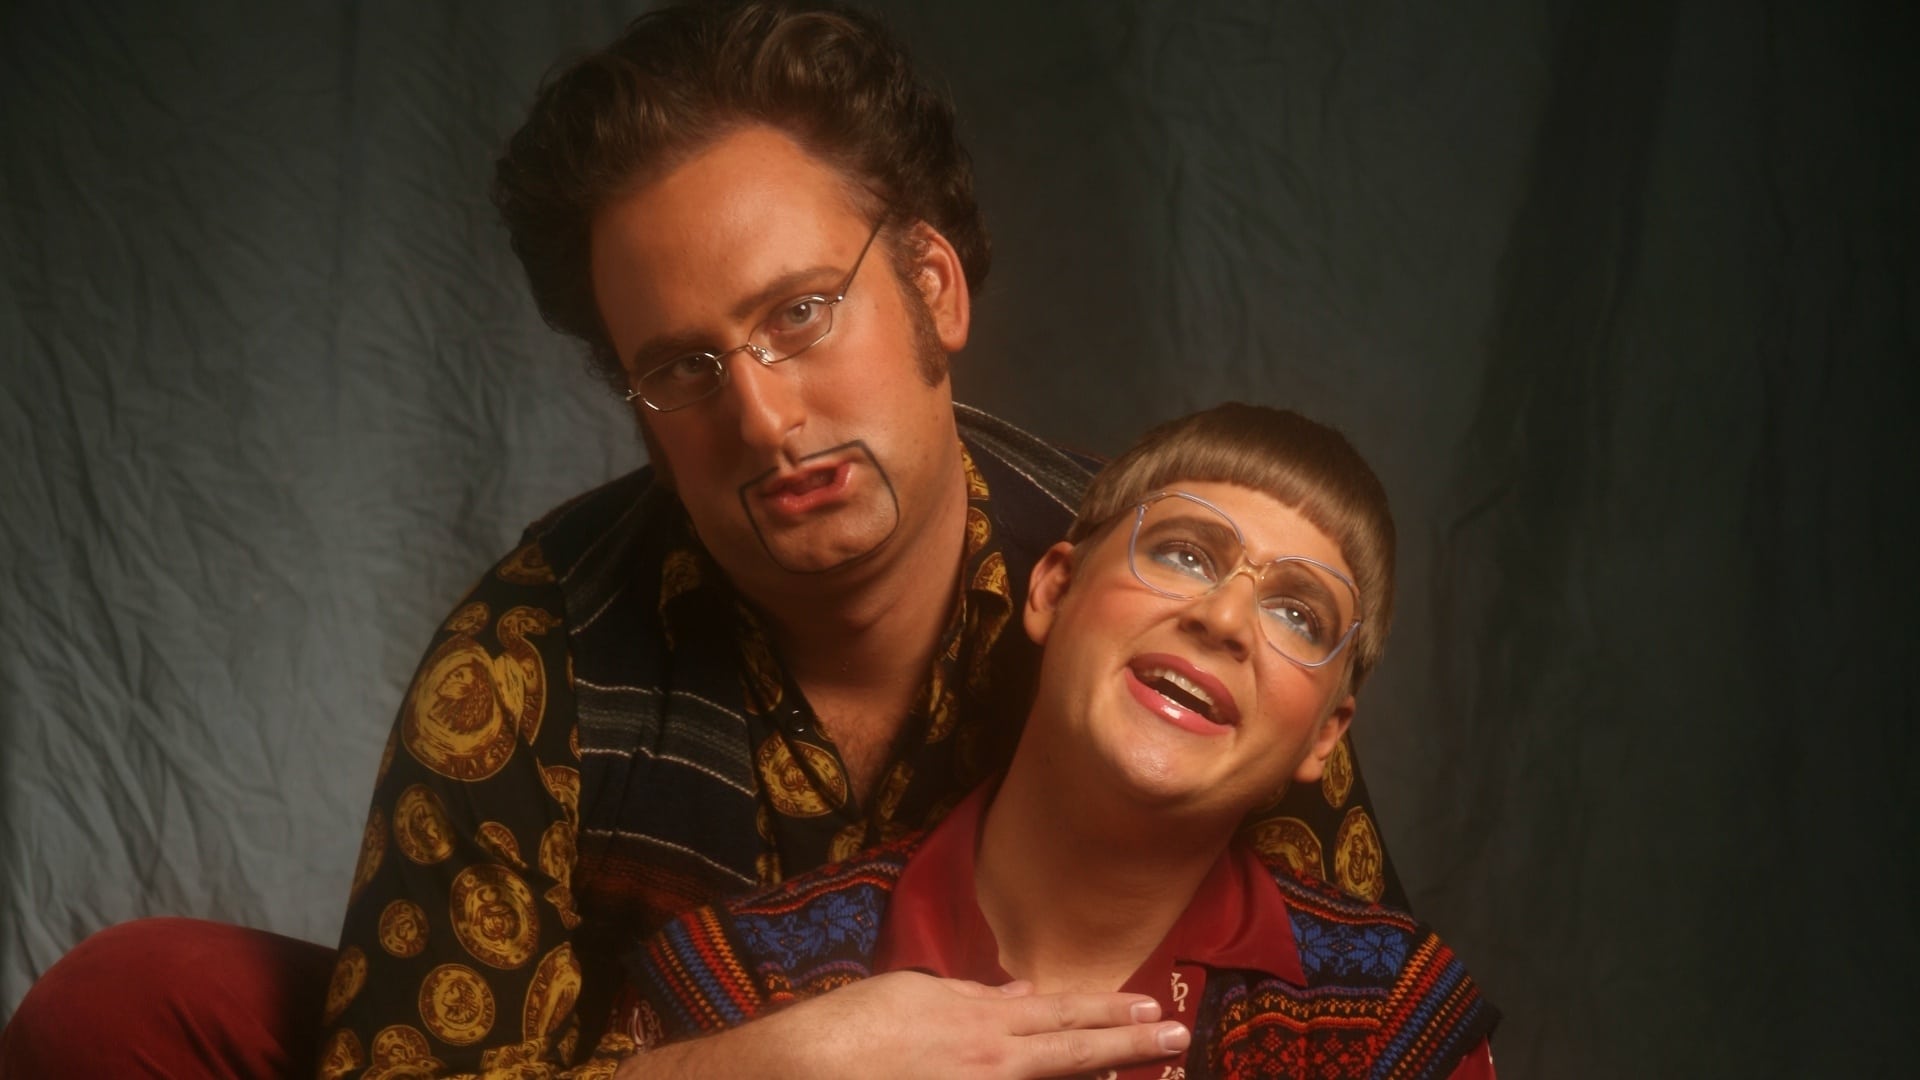 Are tim and eric married?